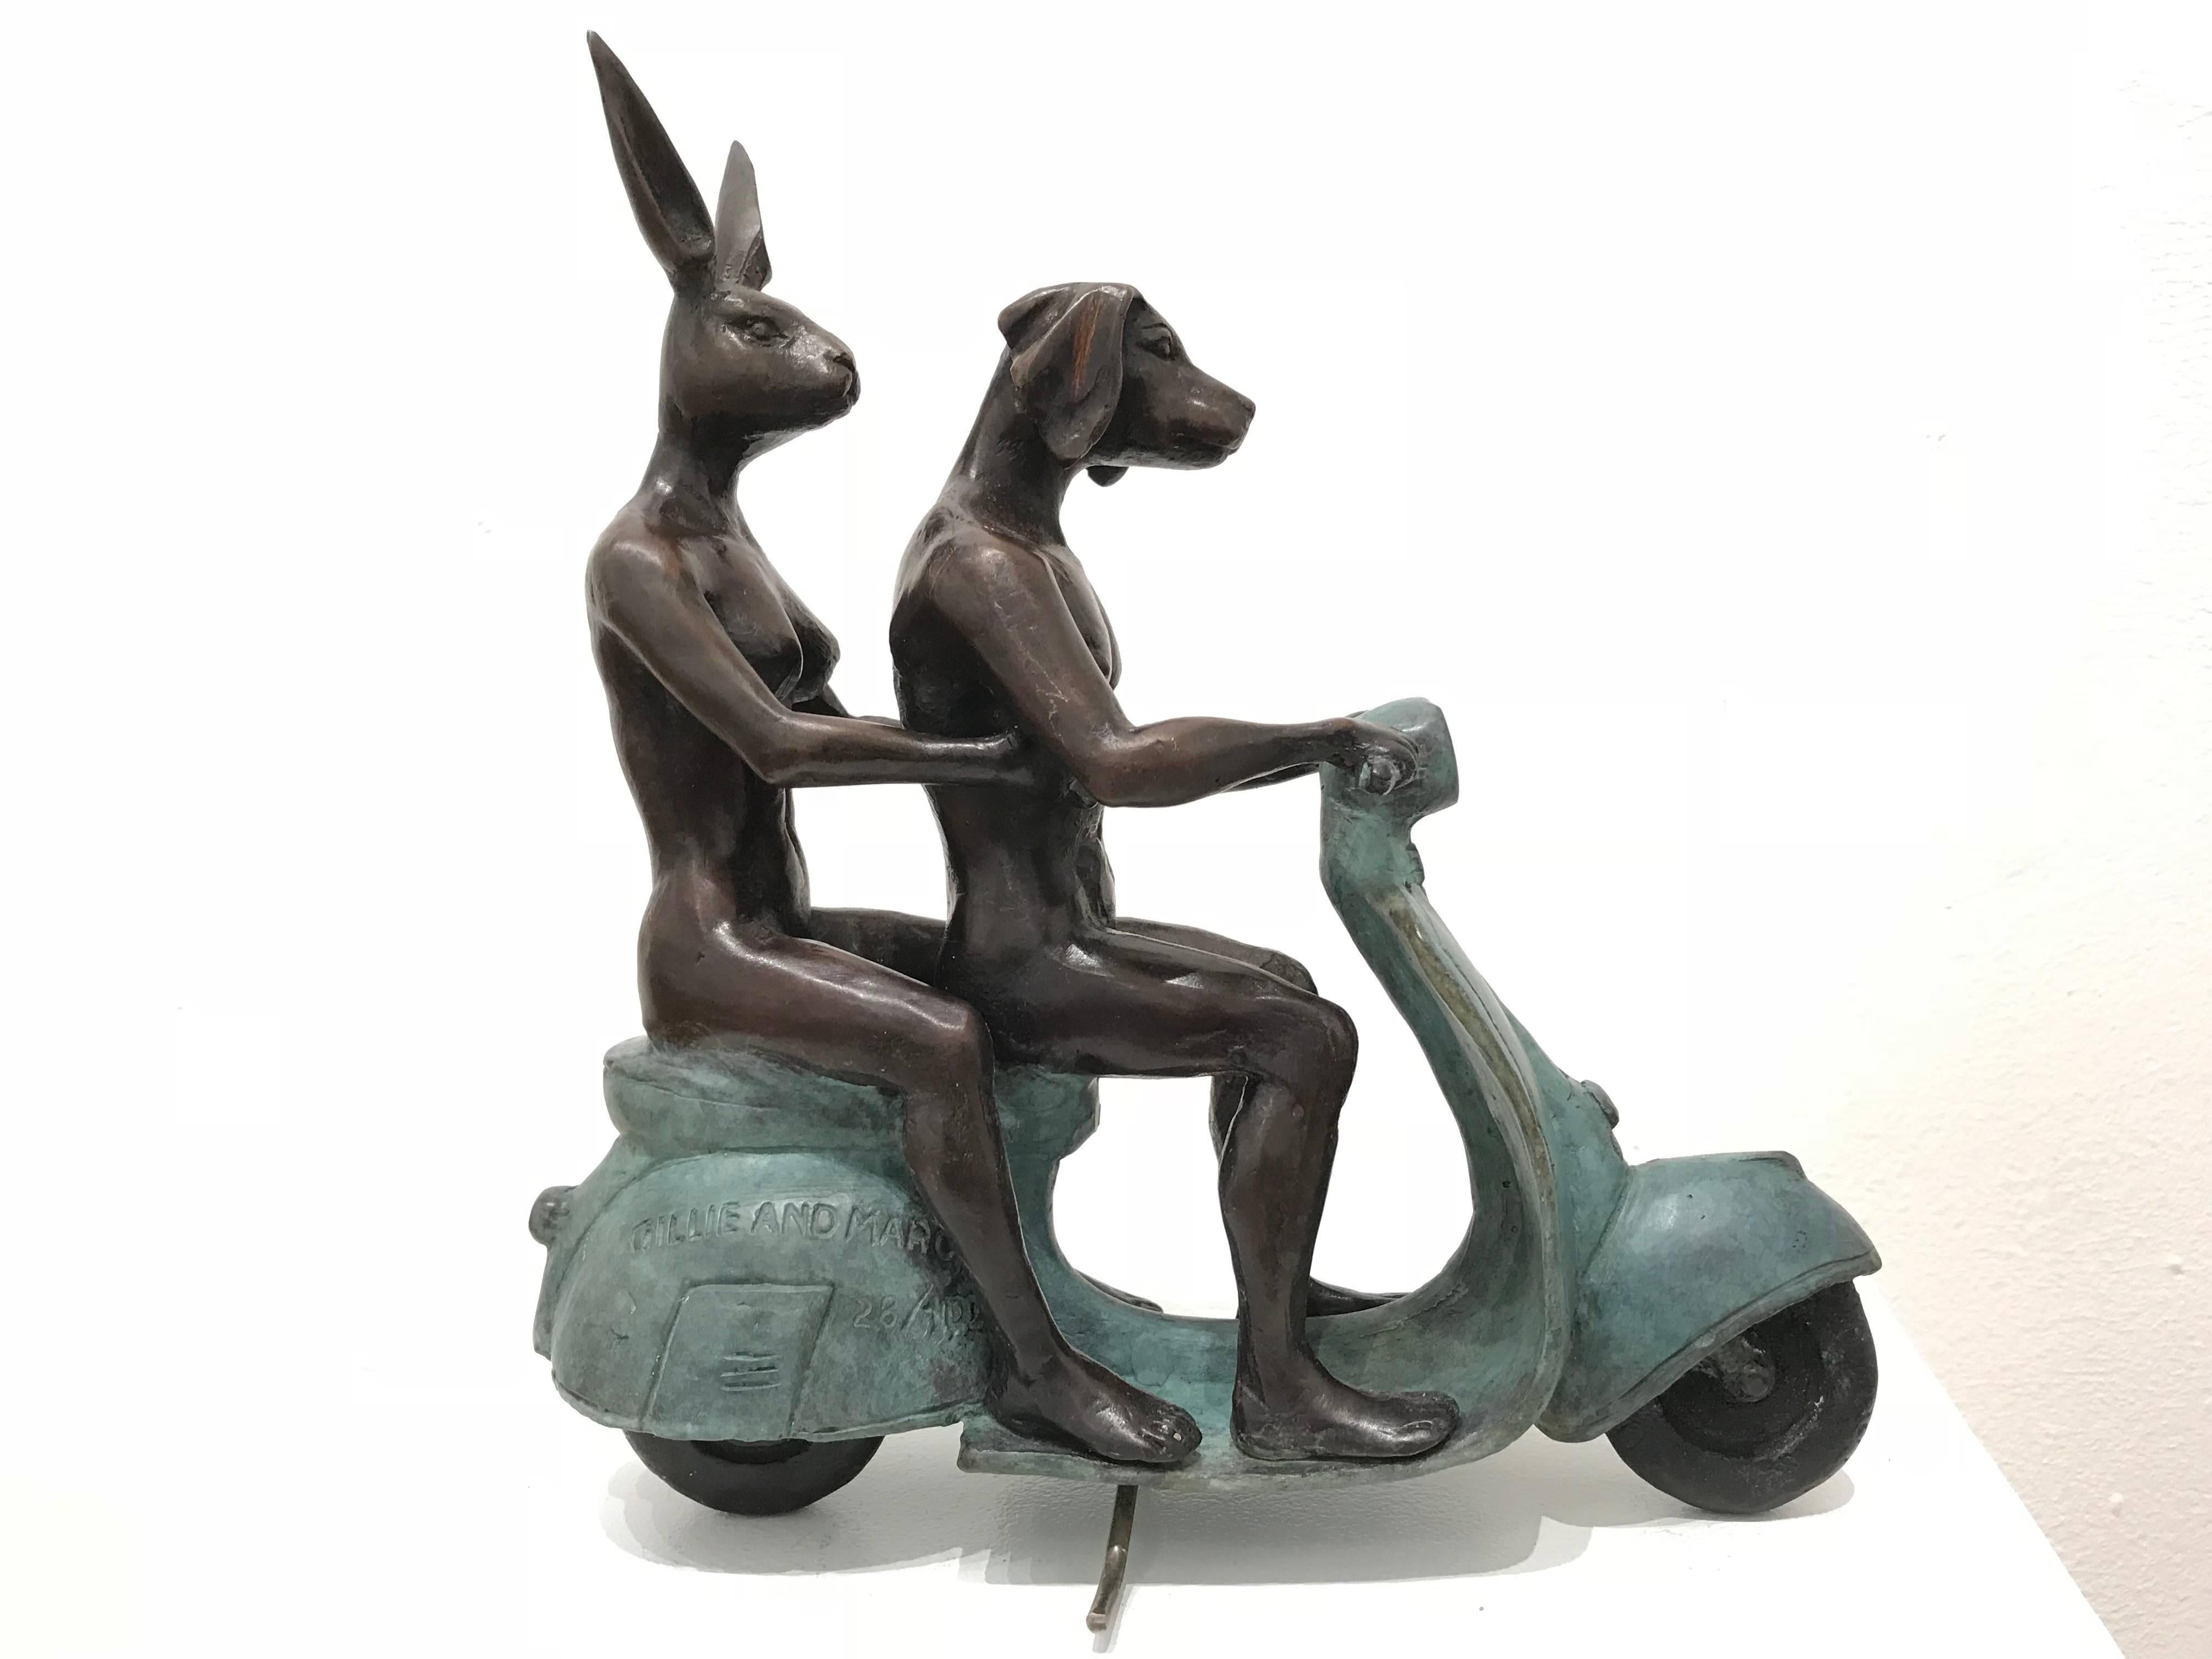 They were the Authentic Vespa Riders in Rome 4